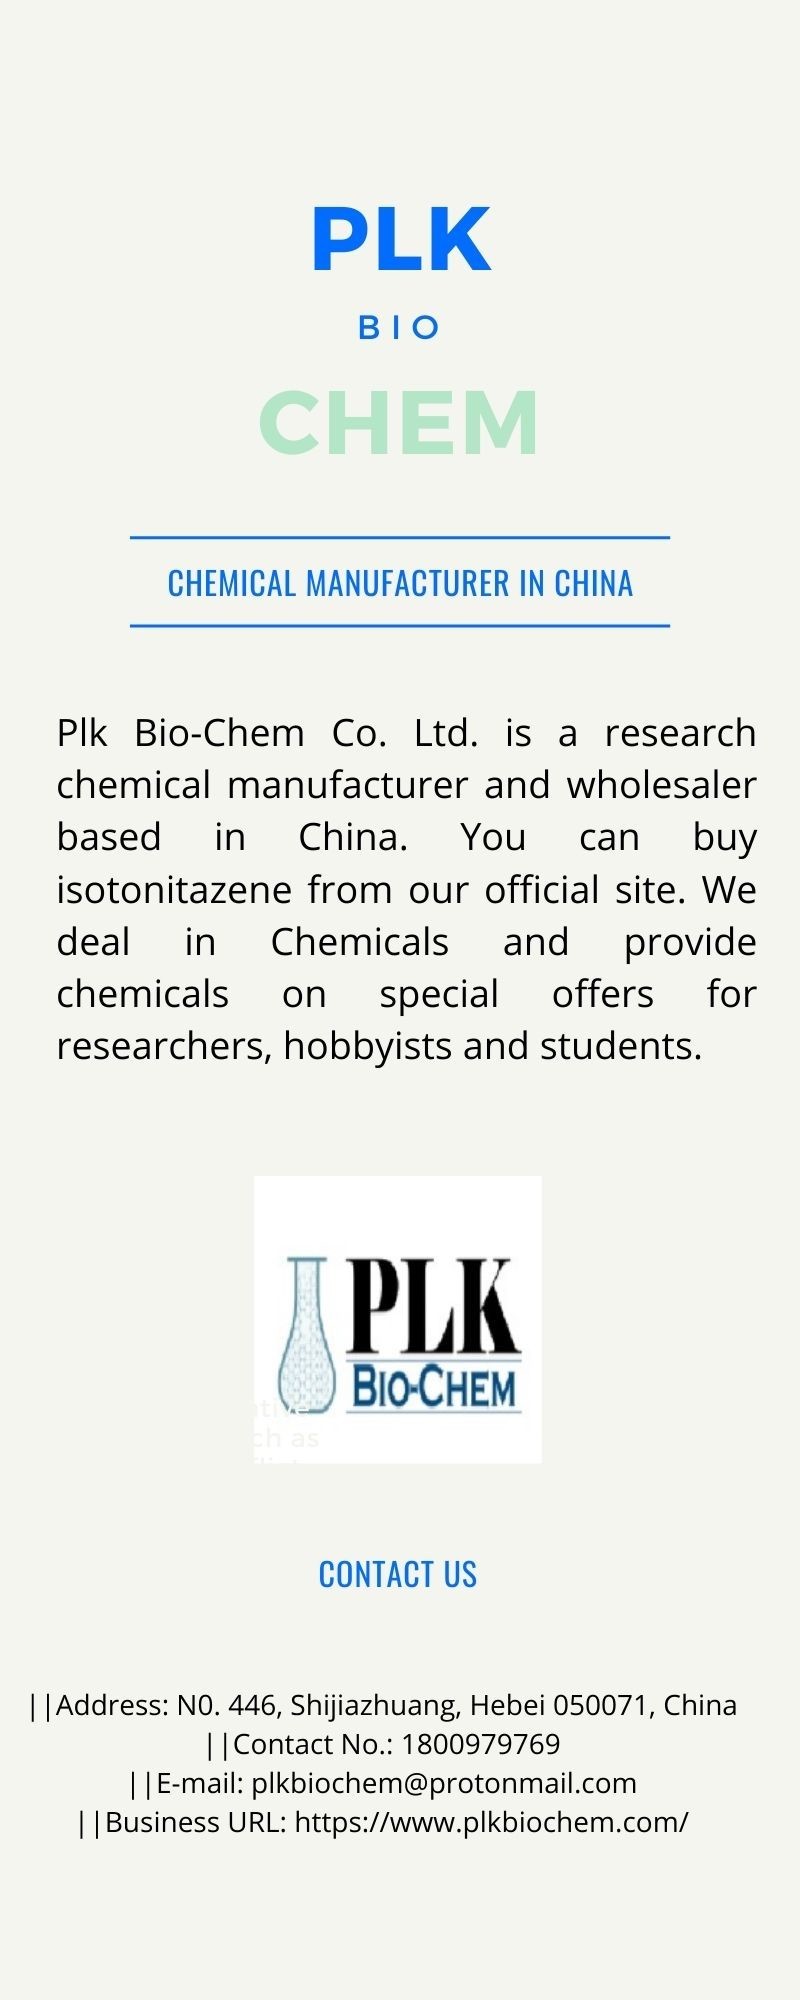 Purchase Chemicals Online Right Now!